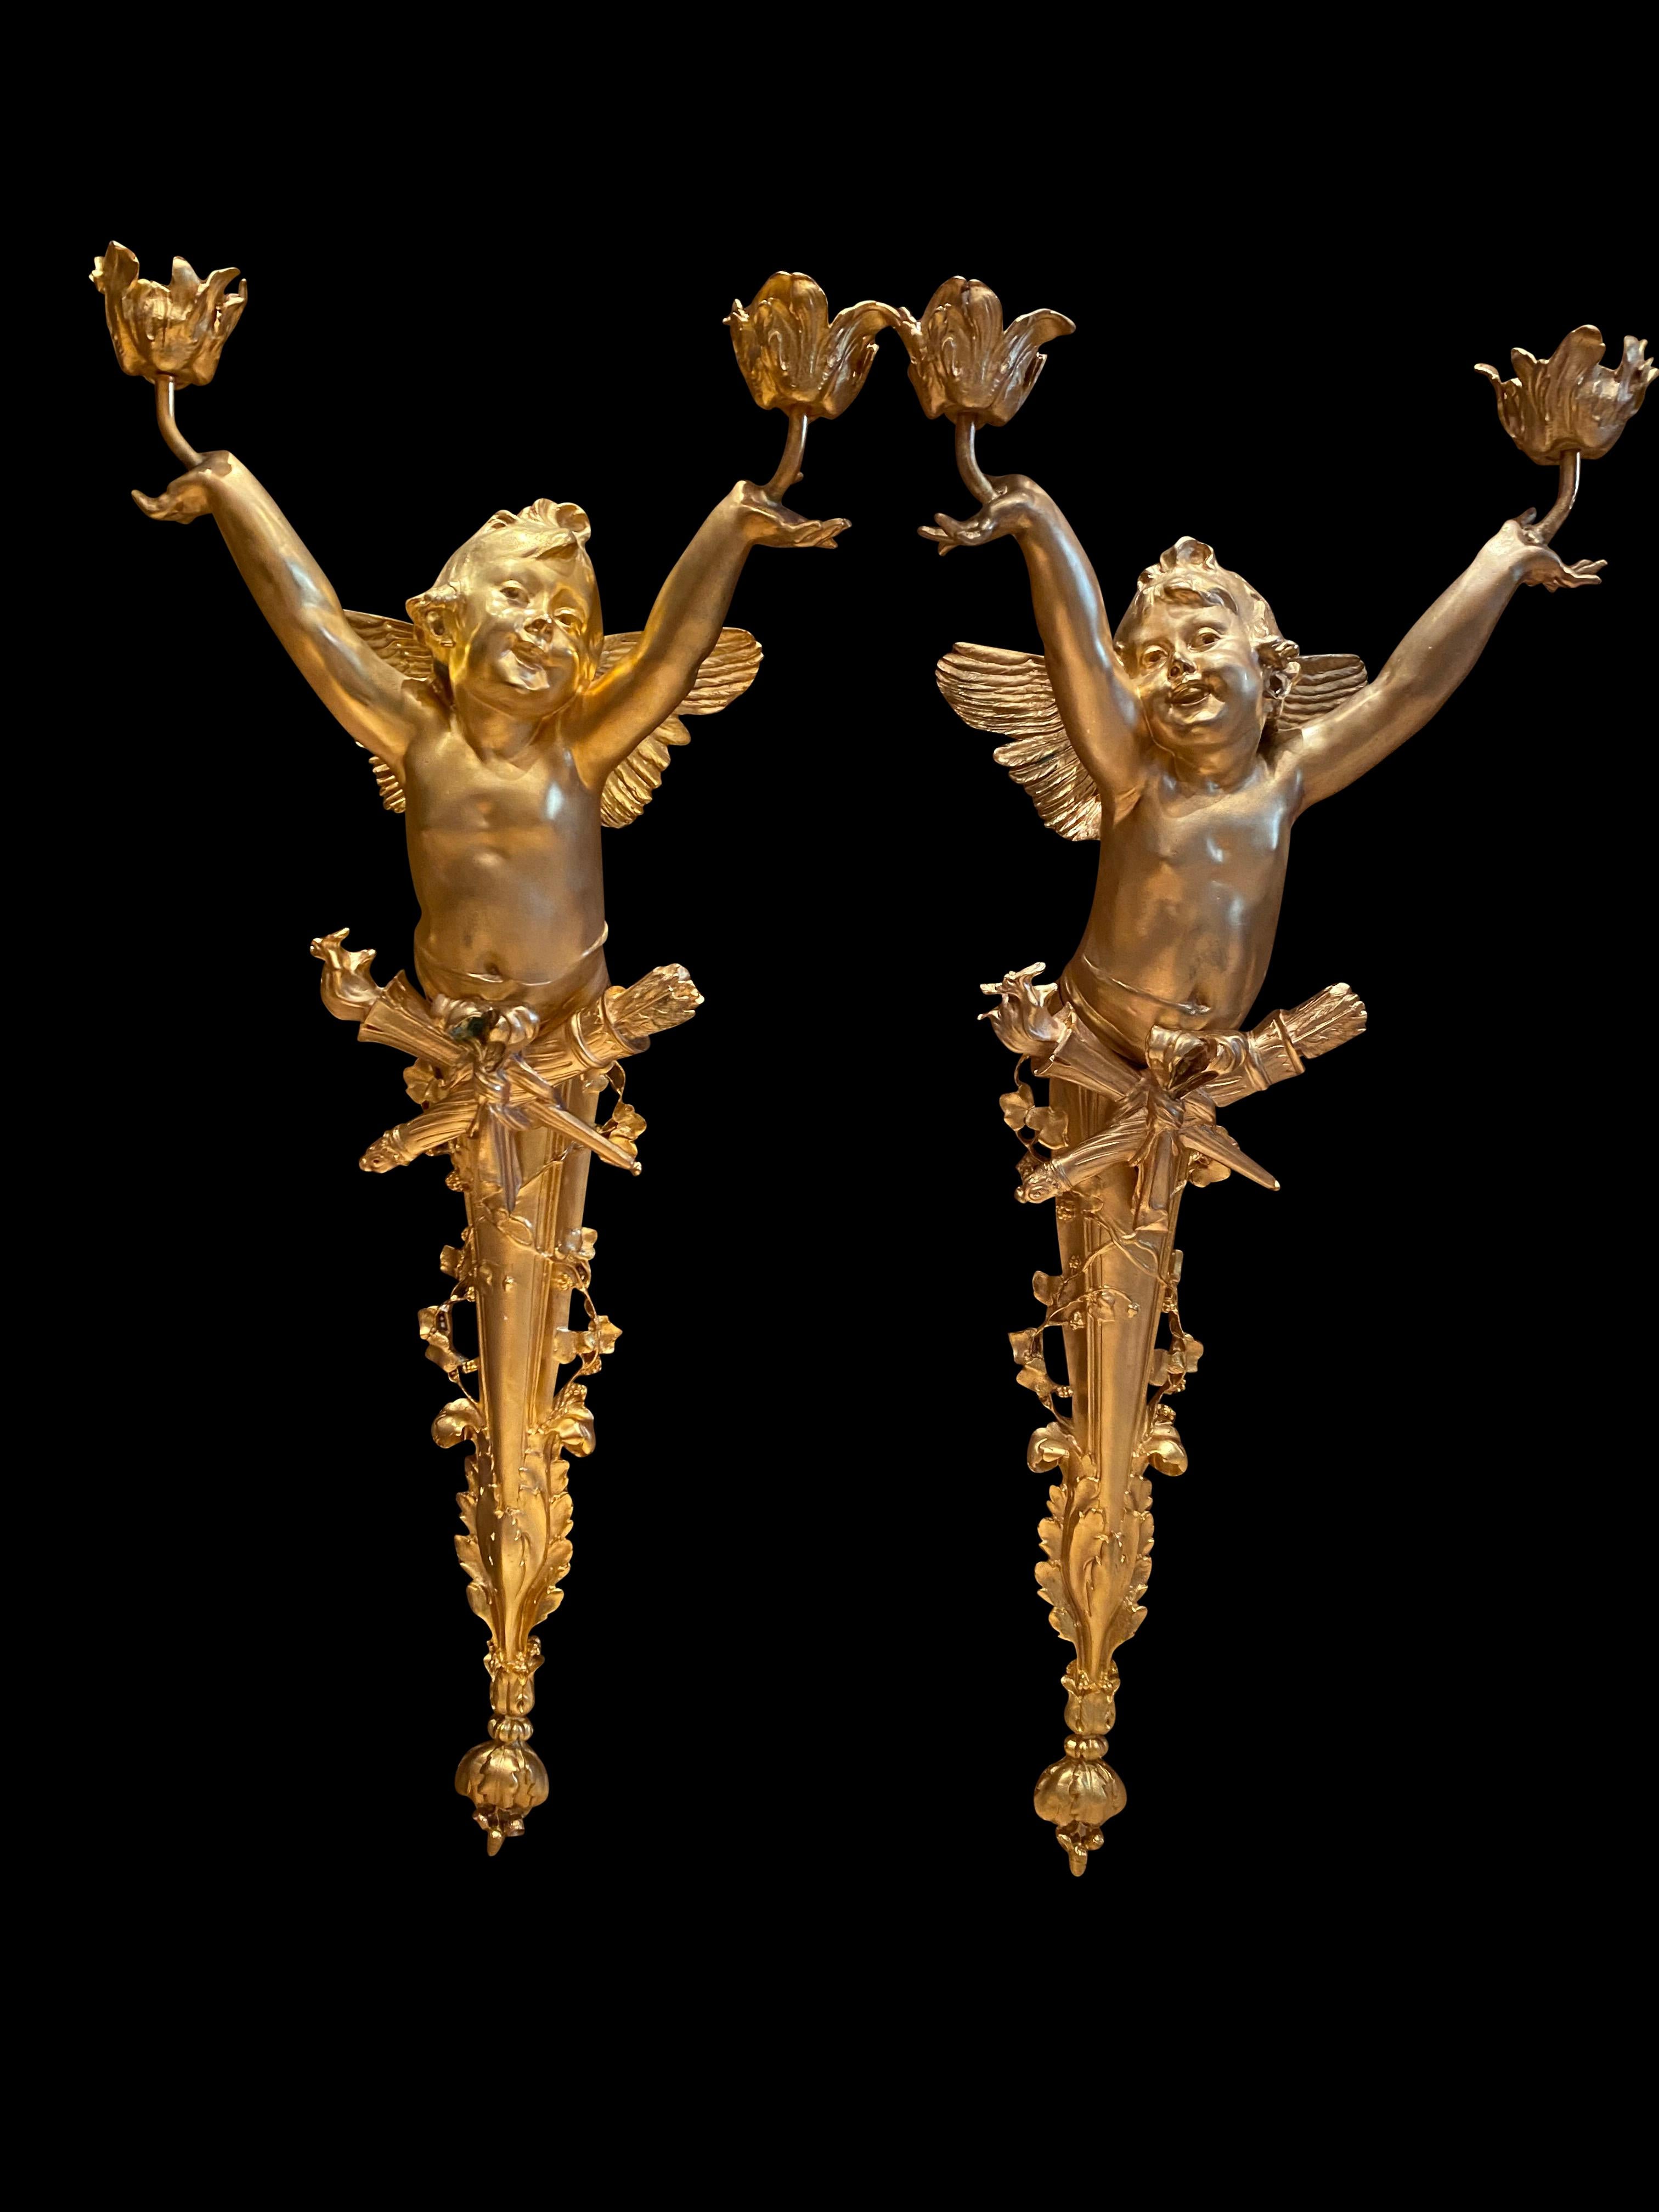 A pair of bronze cherub torchères/wall sconces, 20th century. Each cherub holds a cup decorated in petals, with a crossed torchère and arrow sheath. Perfect for home decoration.